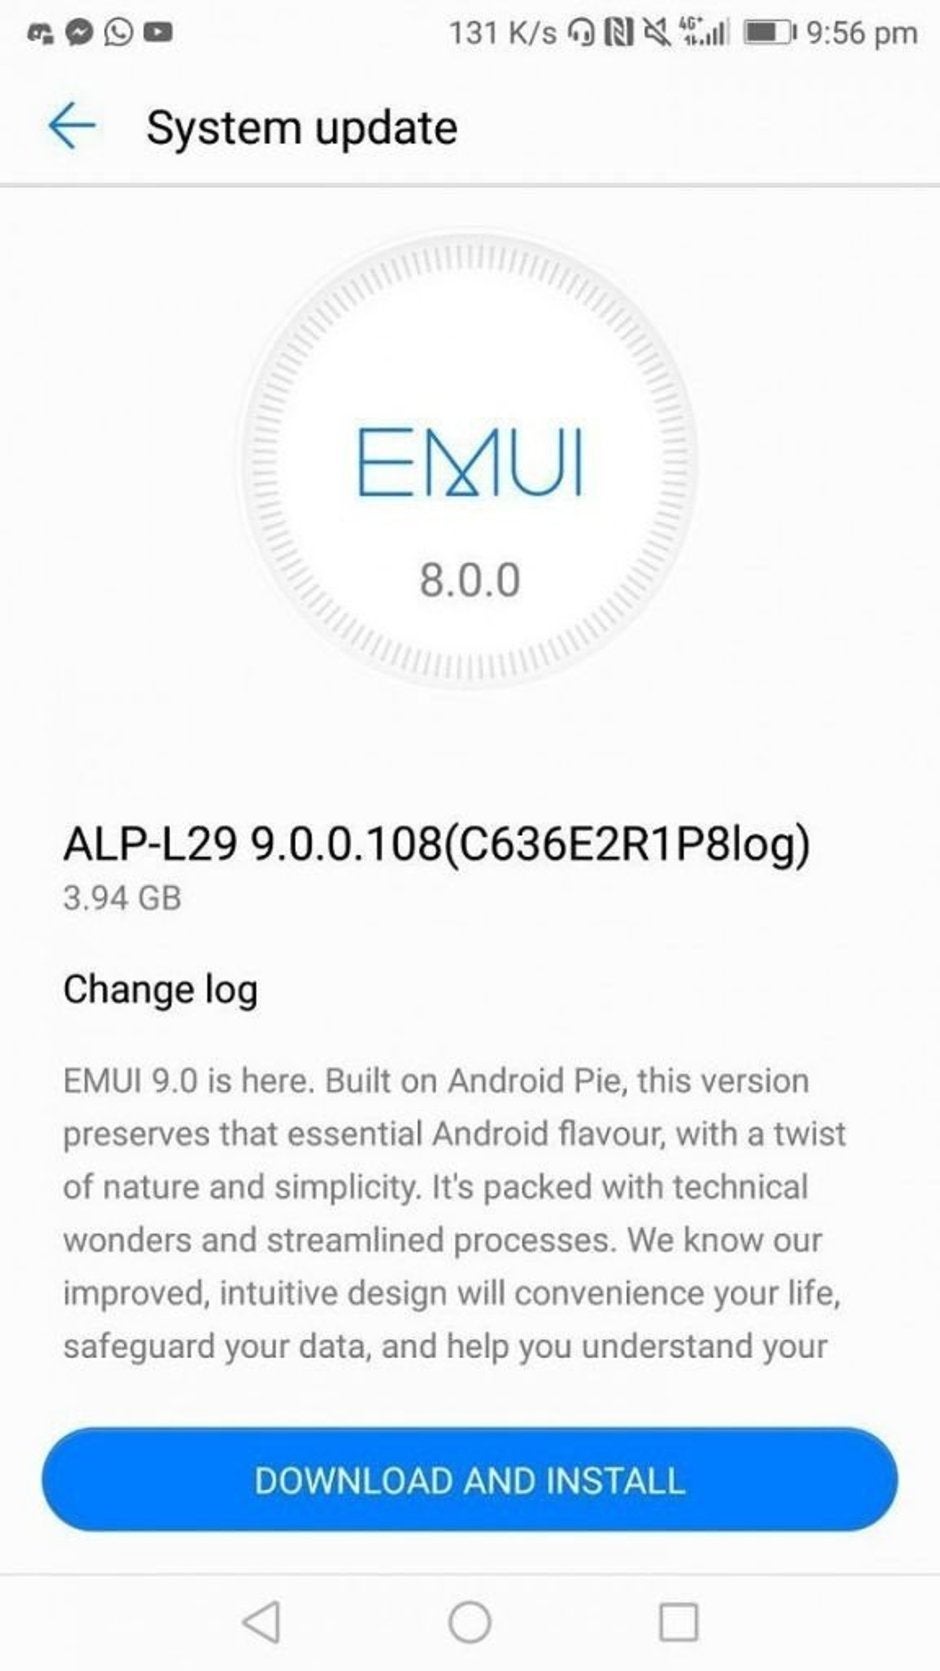 Huawei Mate 10 starts receiving Android 9 Pie update, huge download size